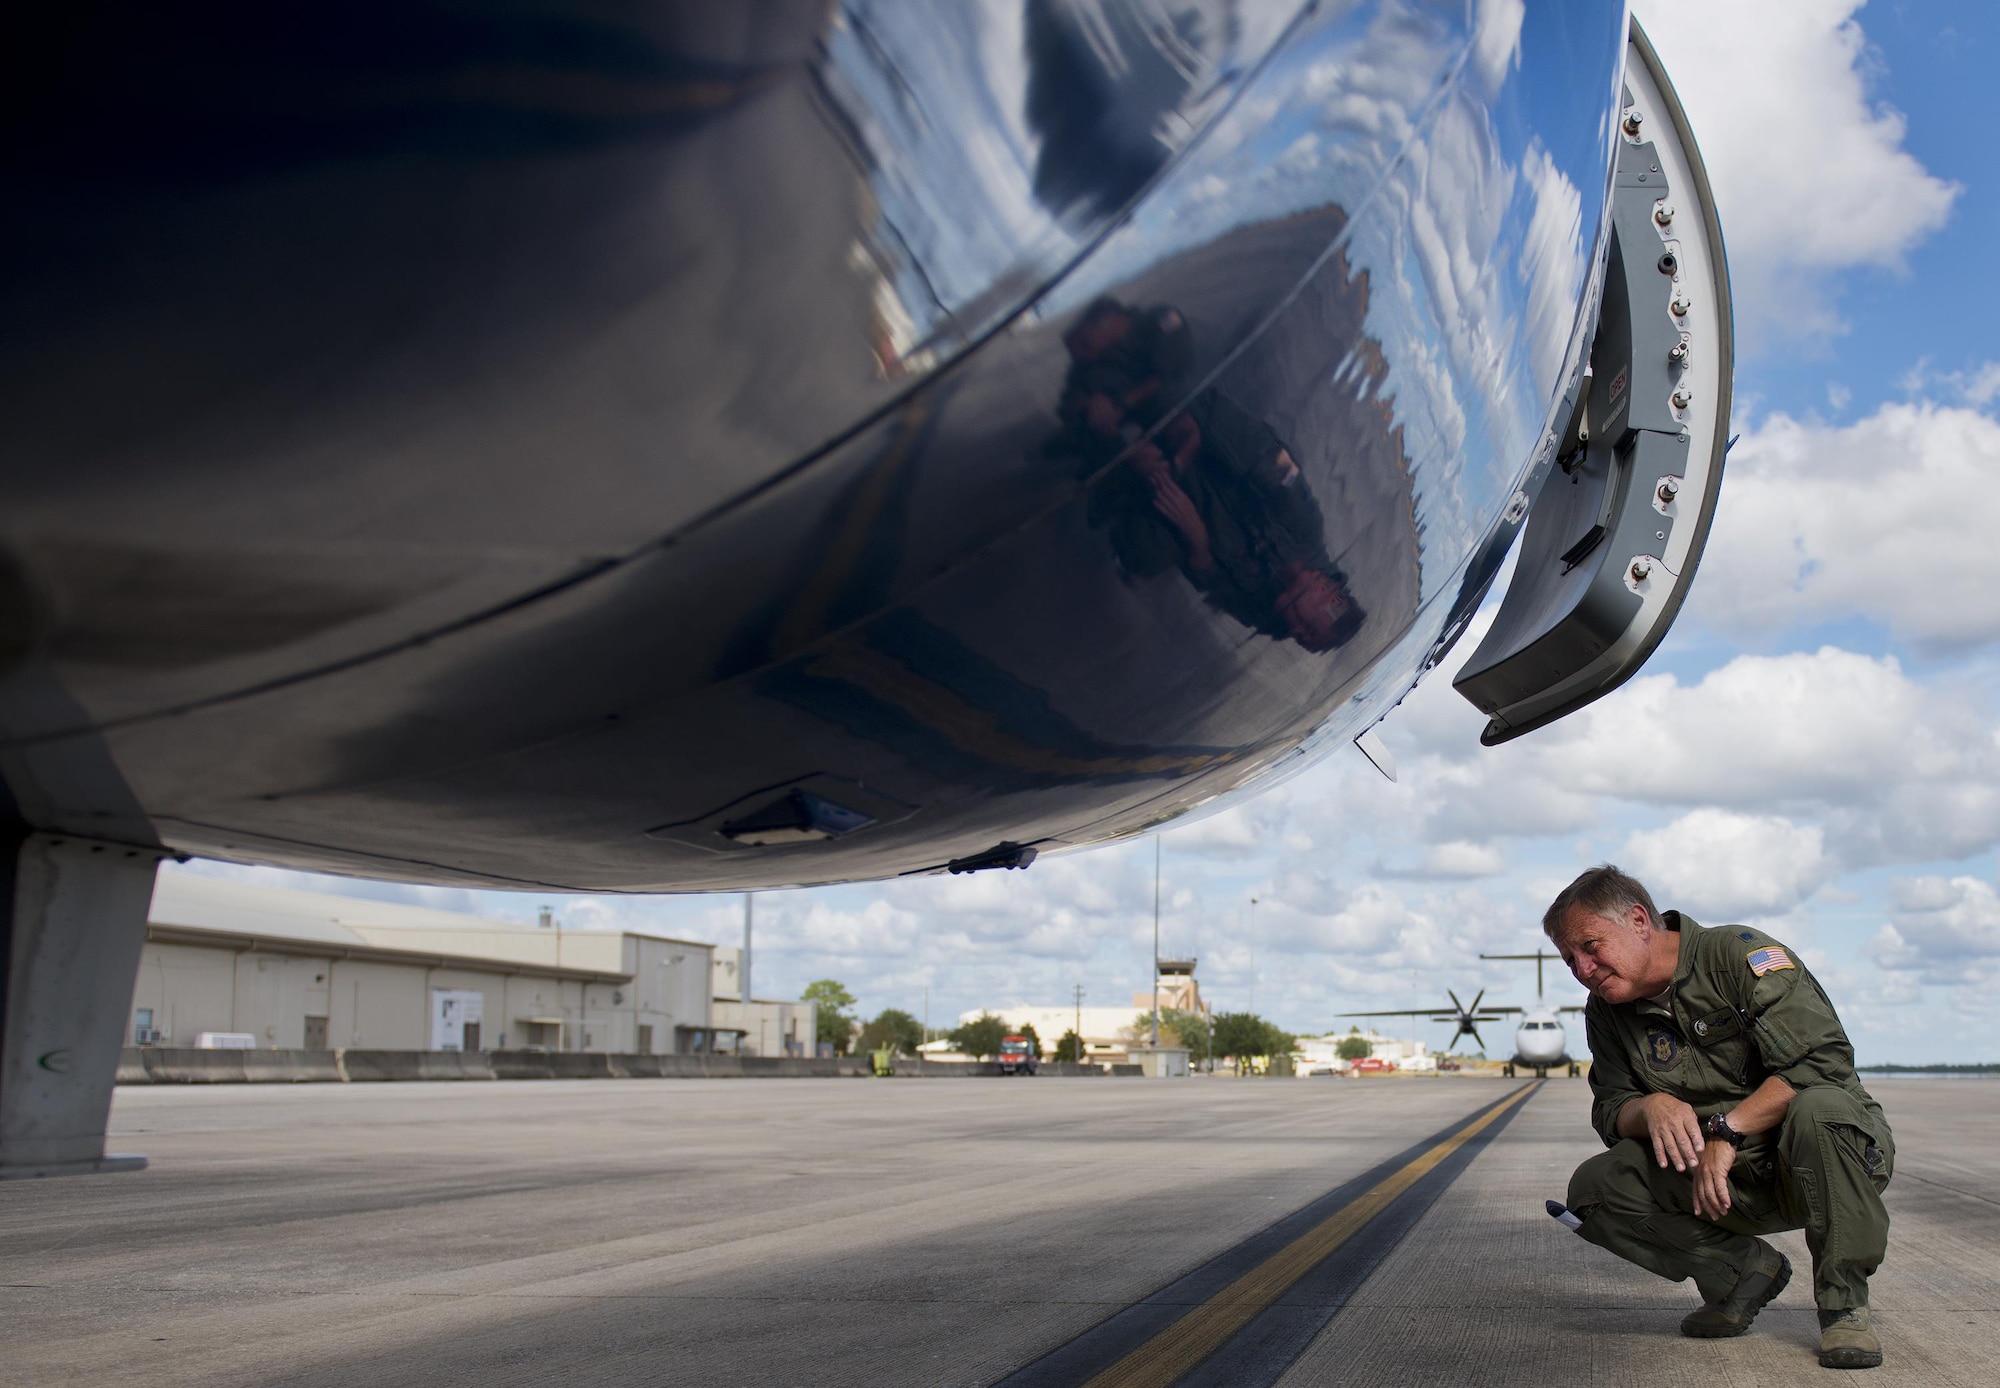 Lt. Col. Michael Theriot, 711th Special Operations Squadron, completes his postflight checks on a C-146 Wolfhound at Duke Field, Fla., Oct. 21.  The Air Force Special Operations Wing aircraft are used specifically in the training and operation of the 919th Special Operations Wing’s nonstandard aviation mission.  (U.S. Air Force photo/Tech. Sgt. Sam King)